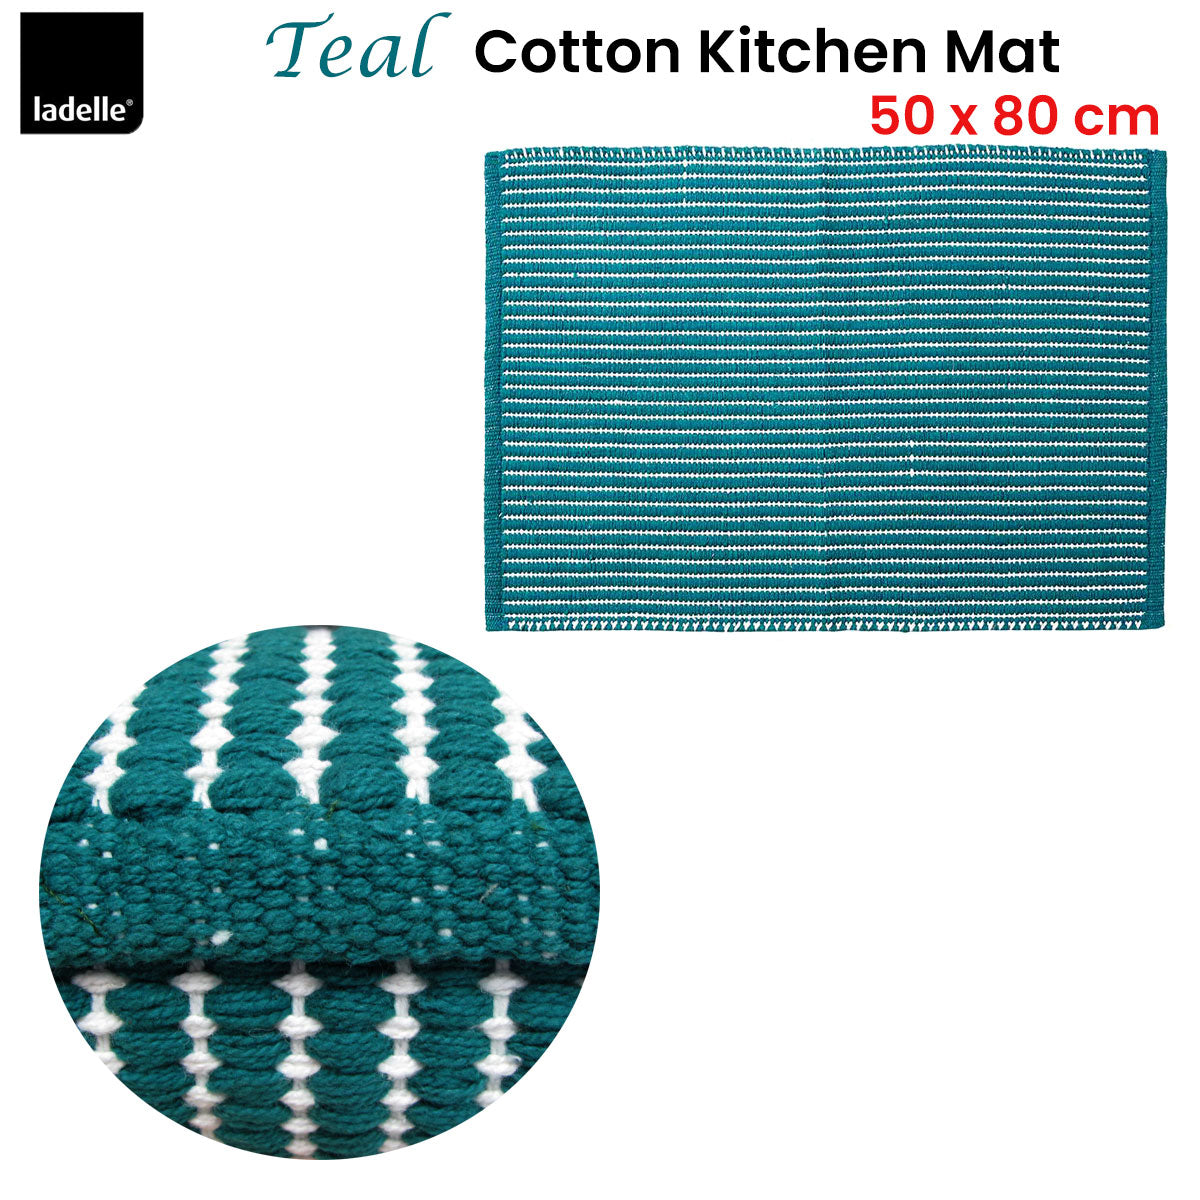 Ladelle Classic Teal 100% Cotton Kitchen Mat Rug